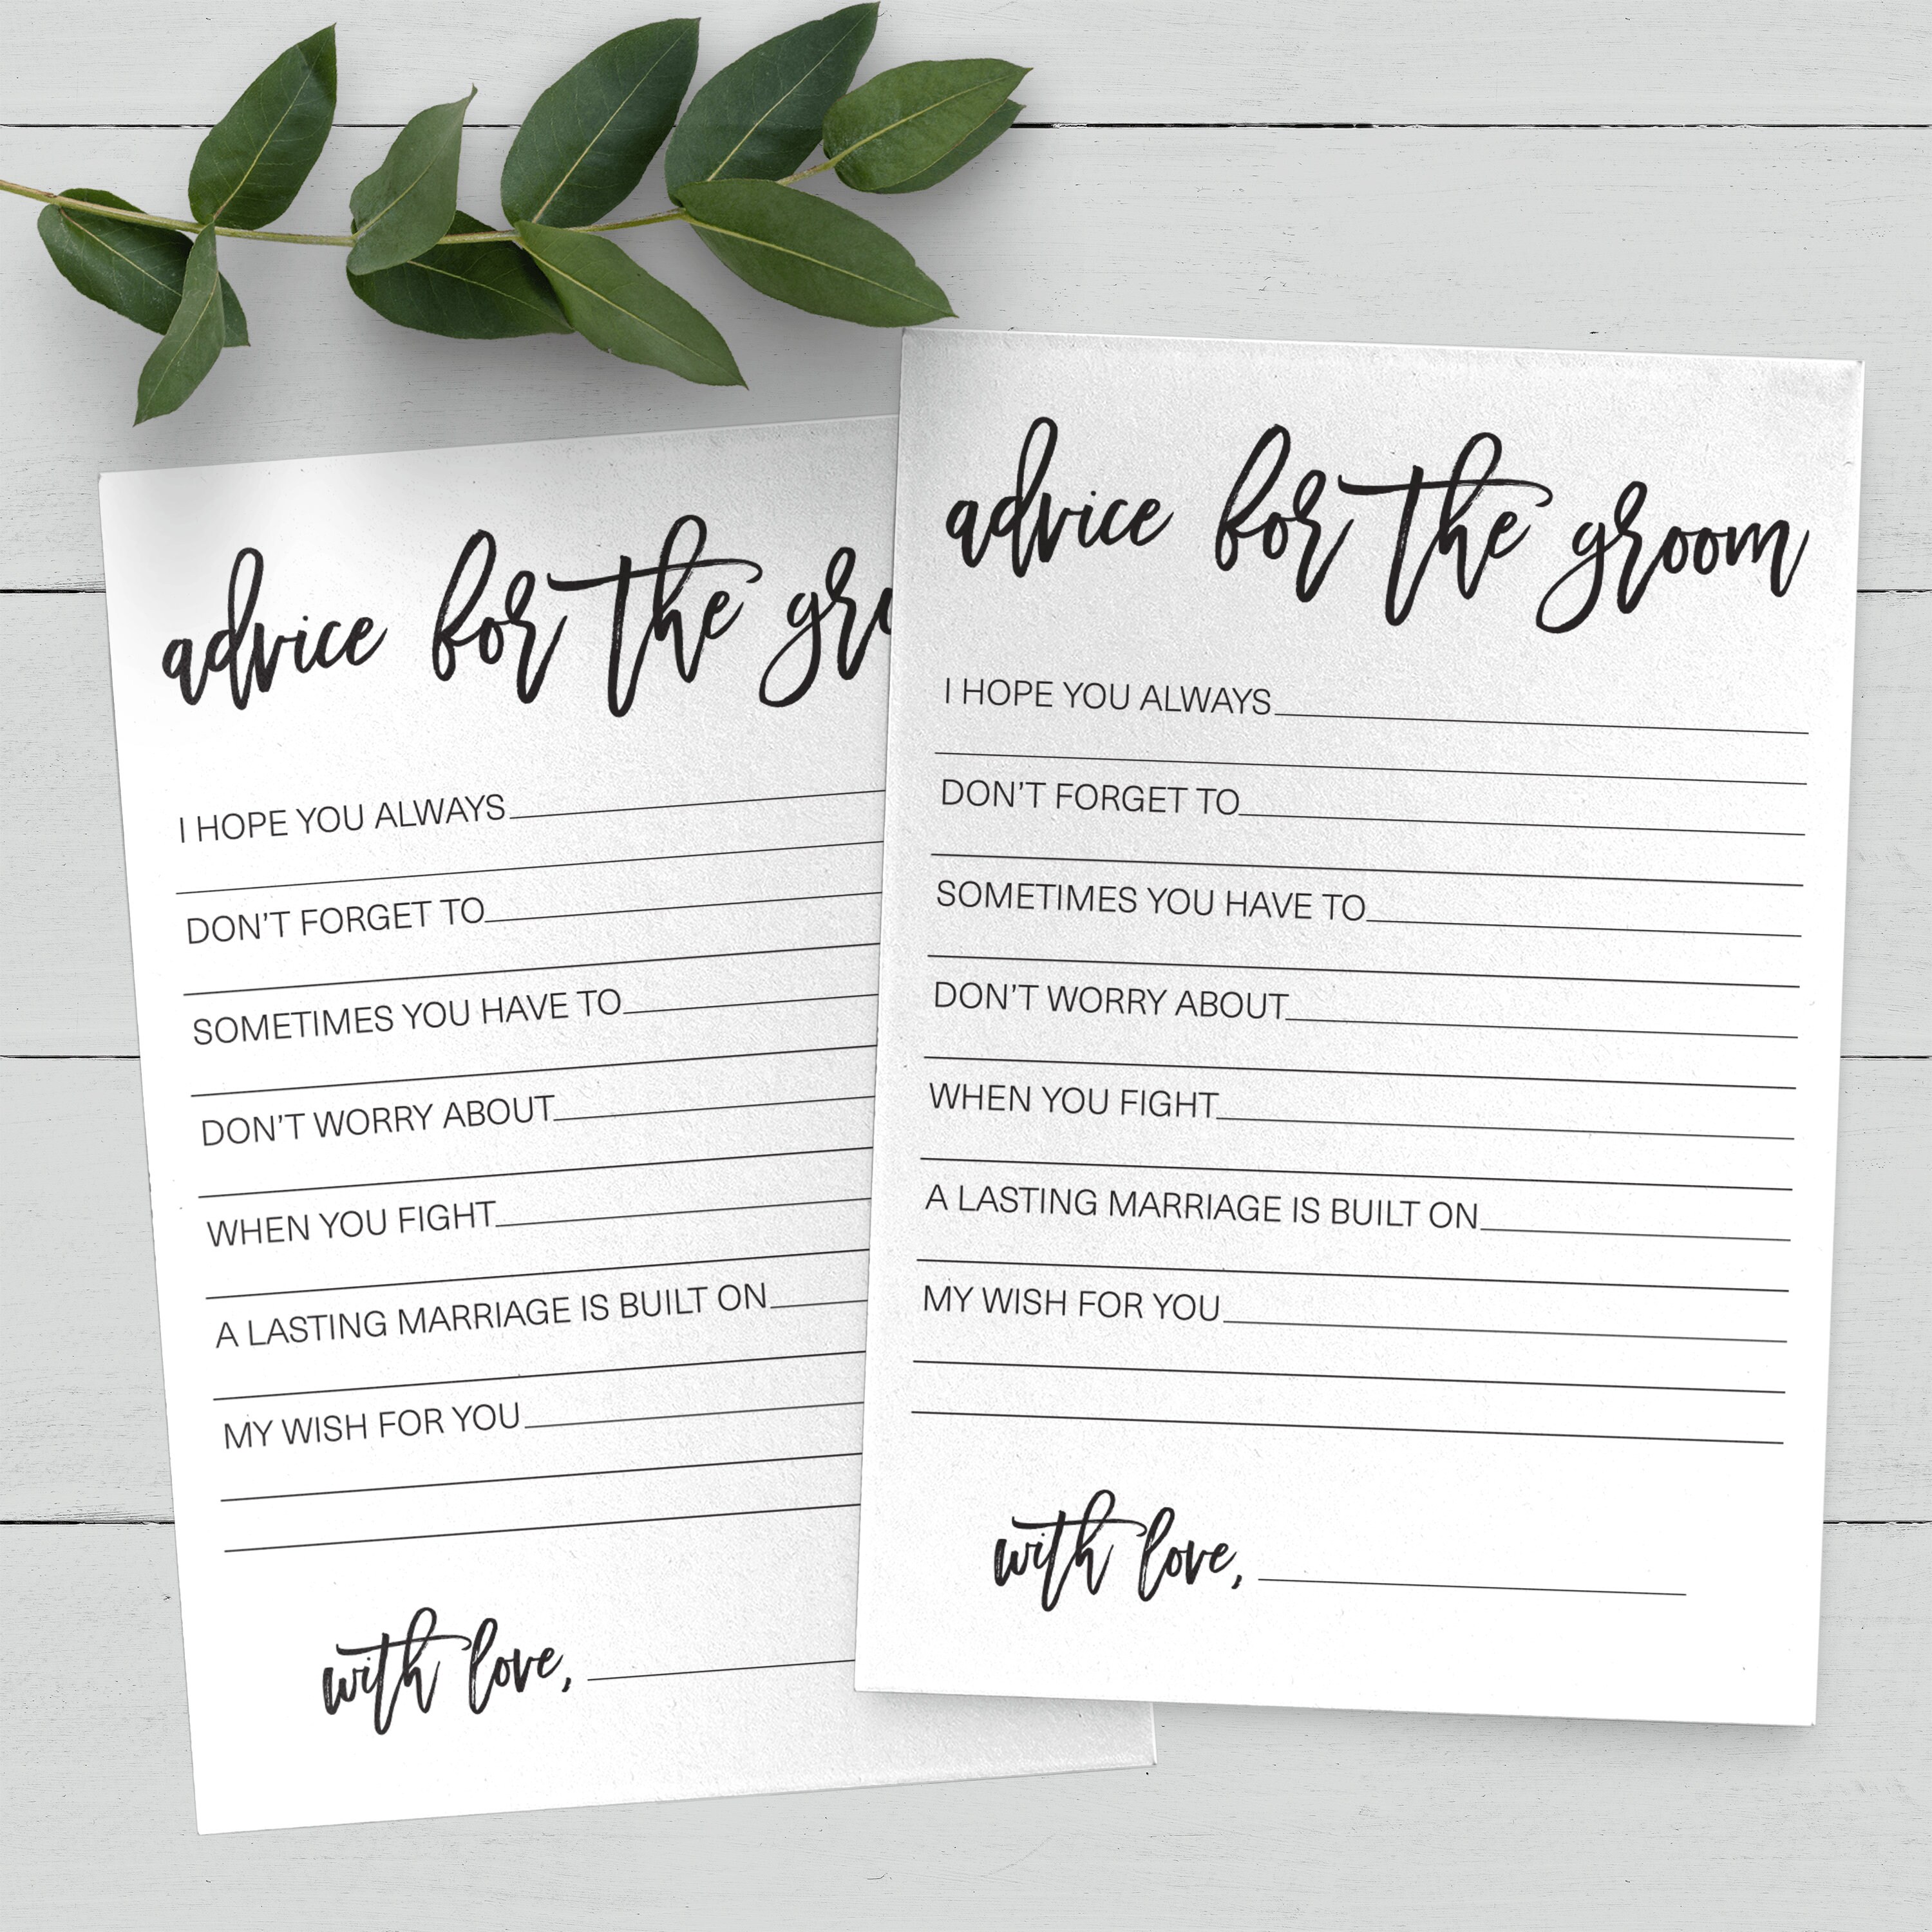 PRINTED Advice for the Groom Cards . Bridal Shower Advice | Etsy